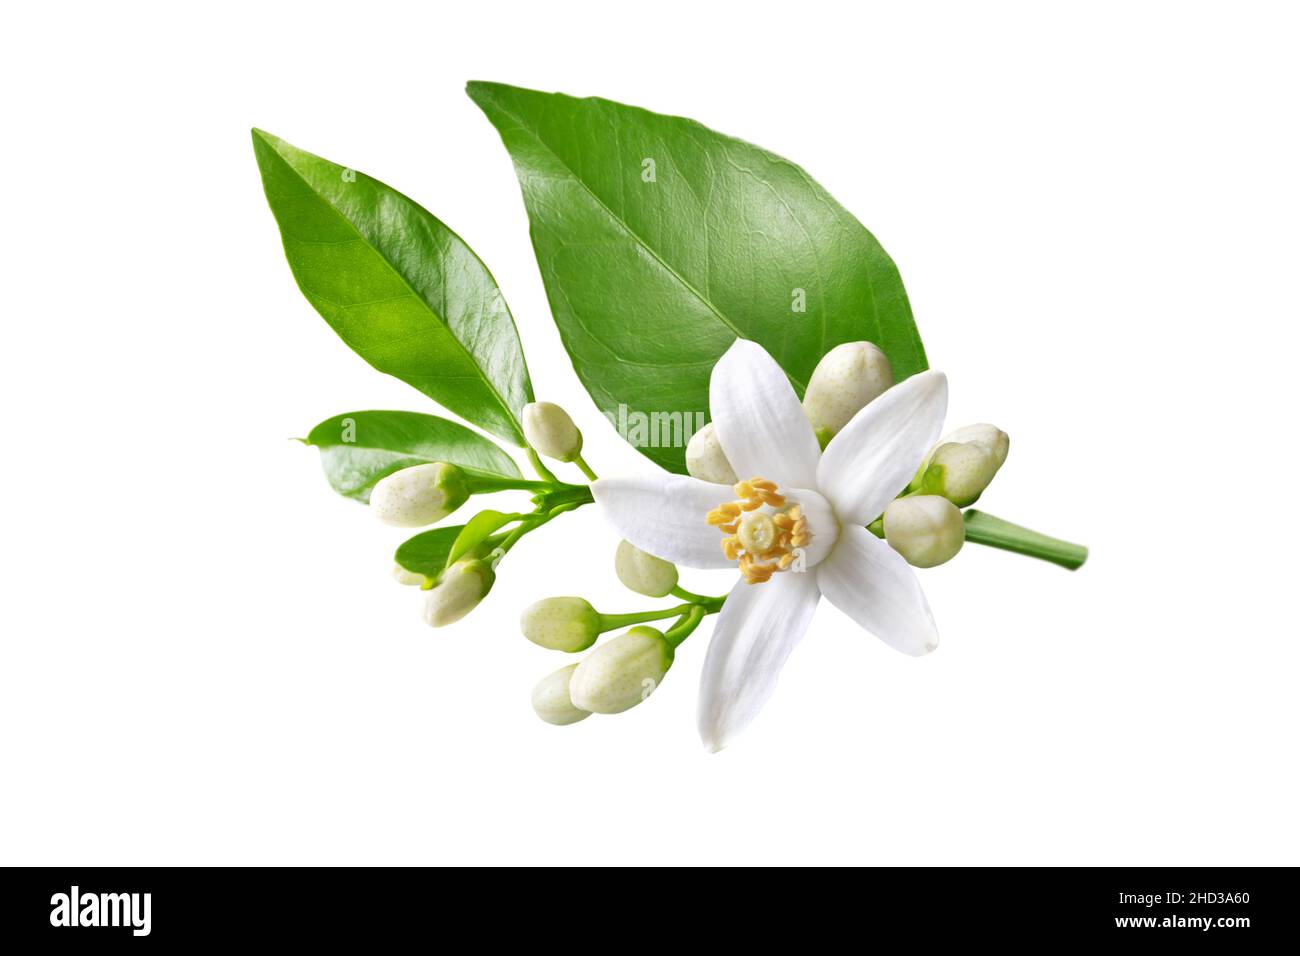 Orange tree branch with white flowers, buds and leaves isolated on white. Neroli blossom. Citrus bloom. Stock Photo